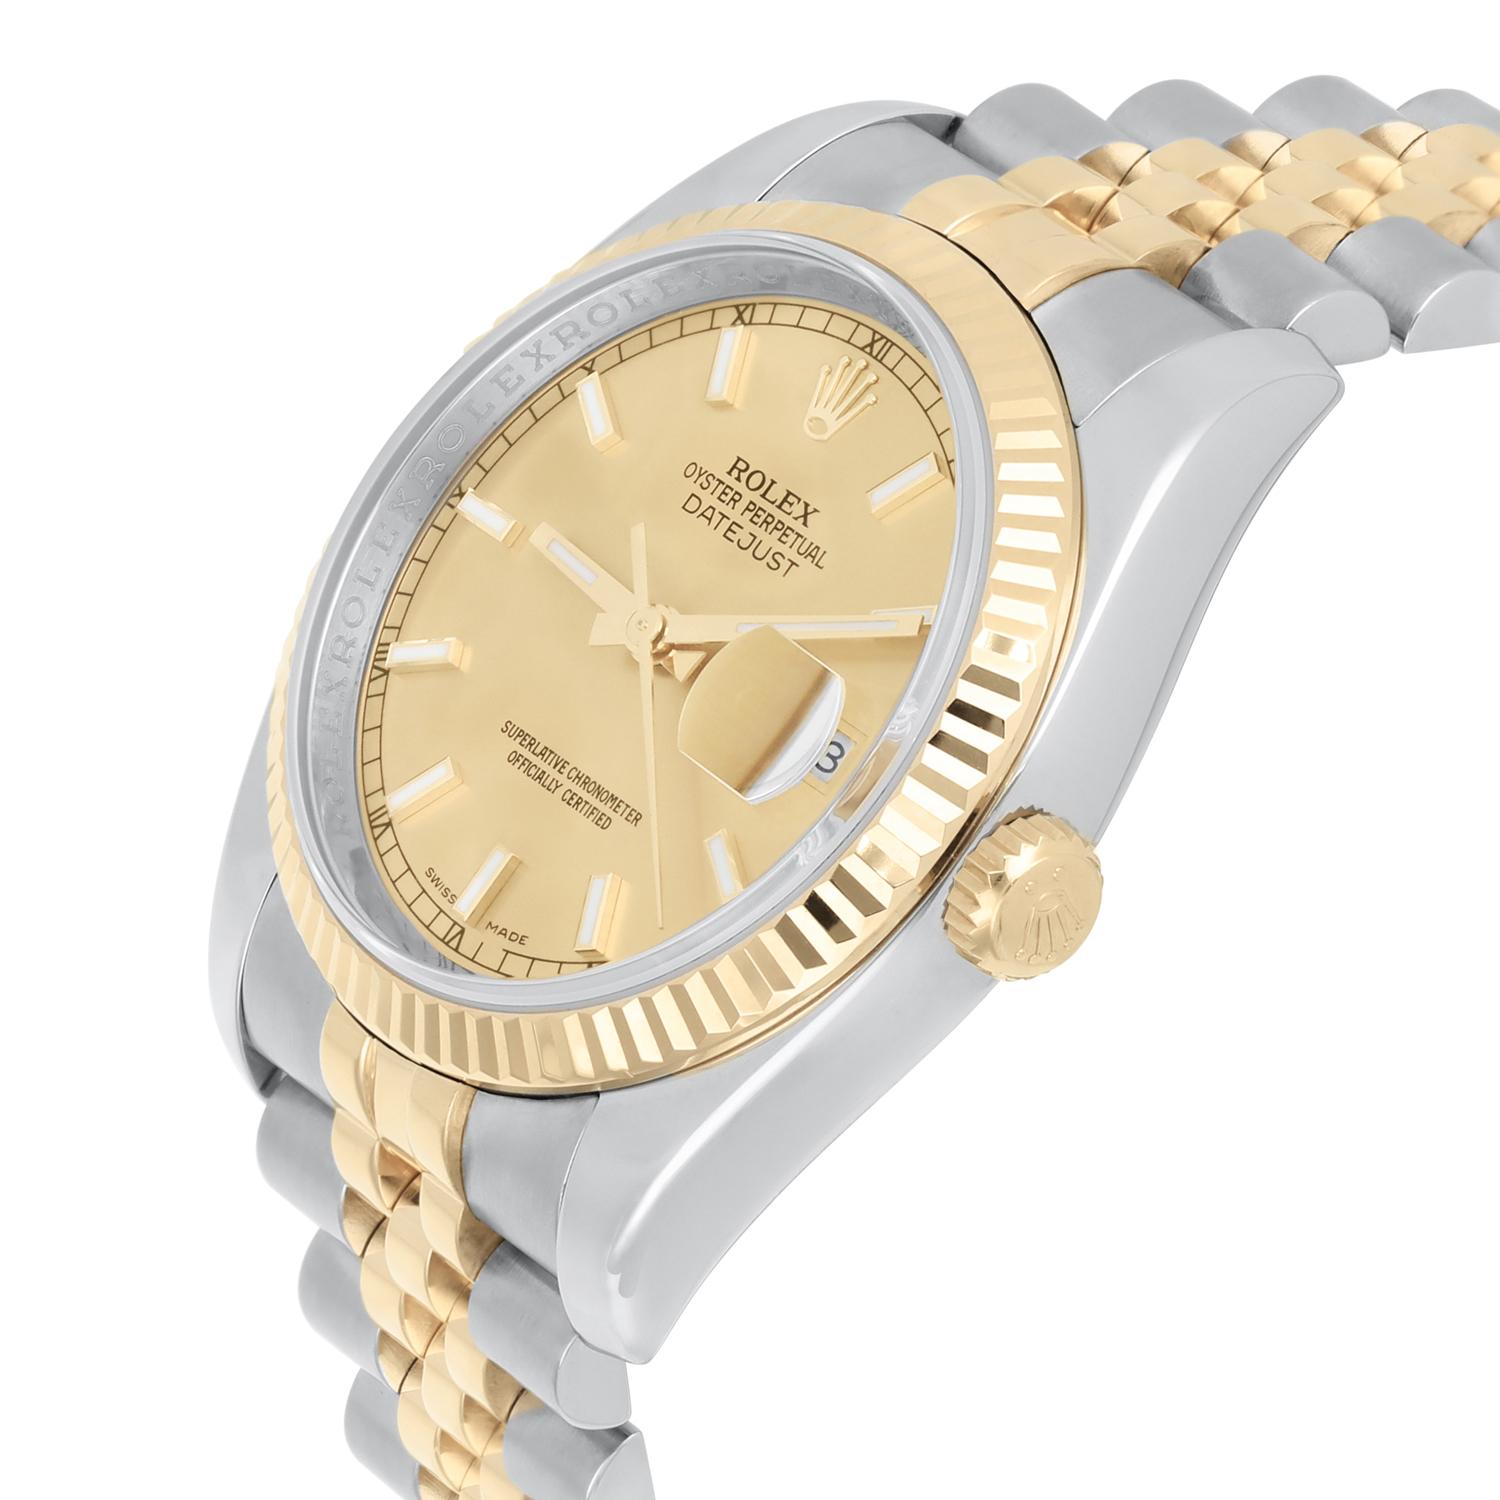 Rolex Datejust 36 Gold and Steel 116233 Watch Champagne Index Dial Jubilee Watch In Excellent Condition For Sale In New York, NY